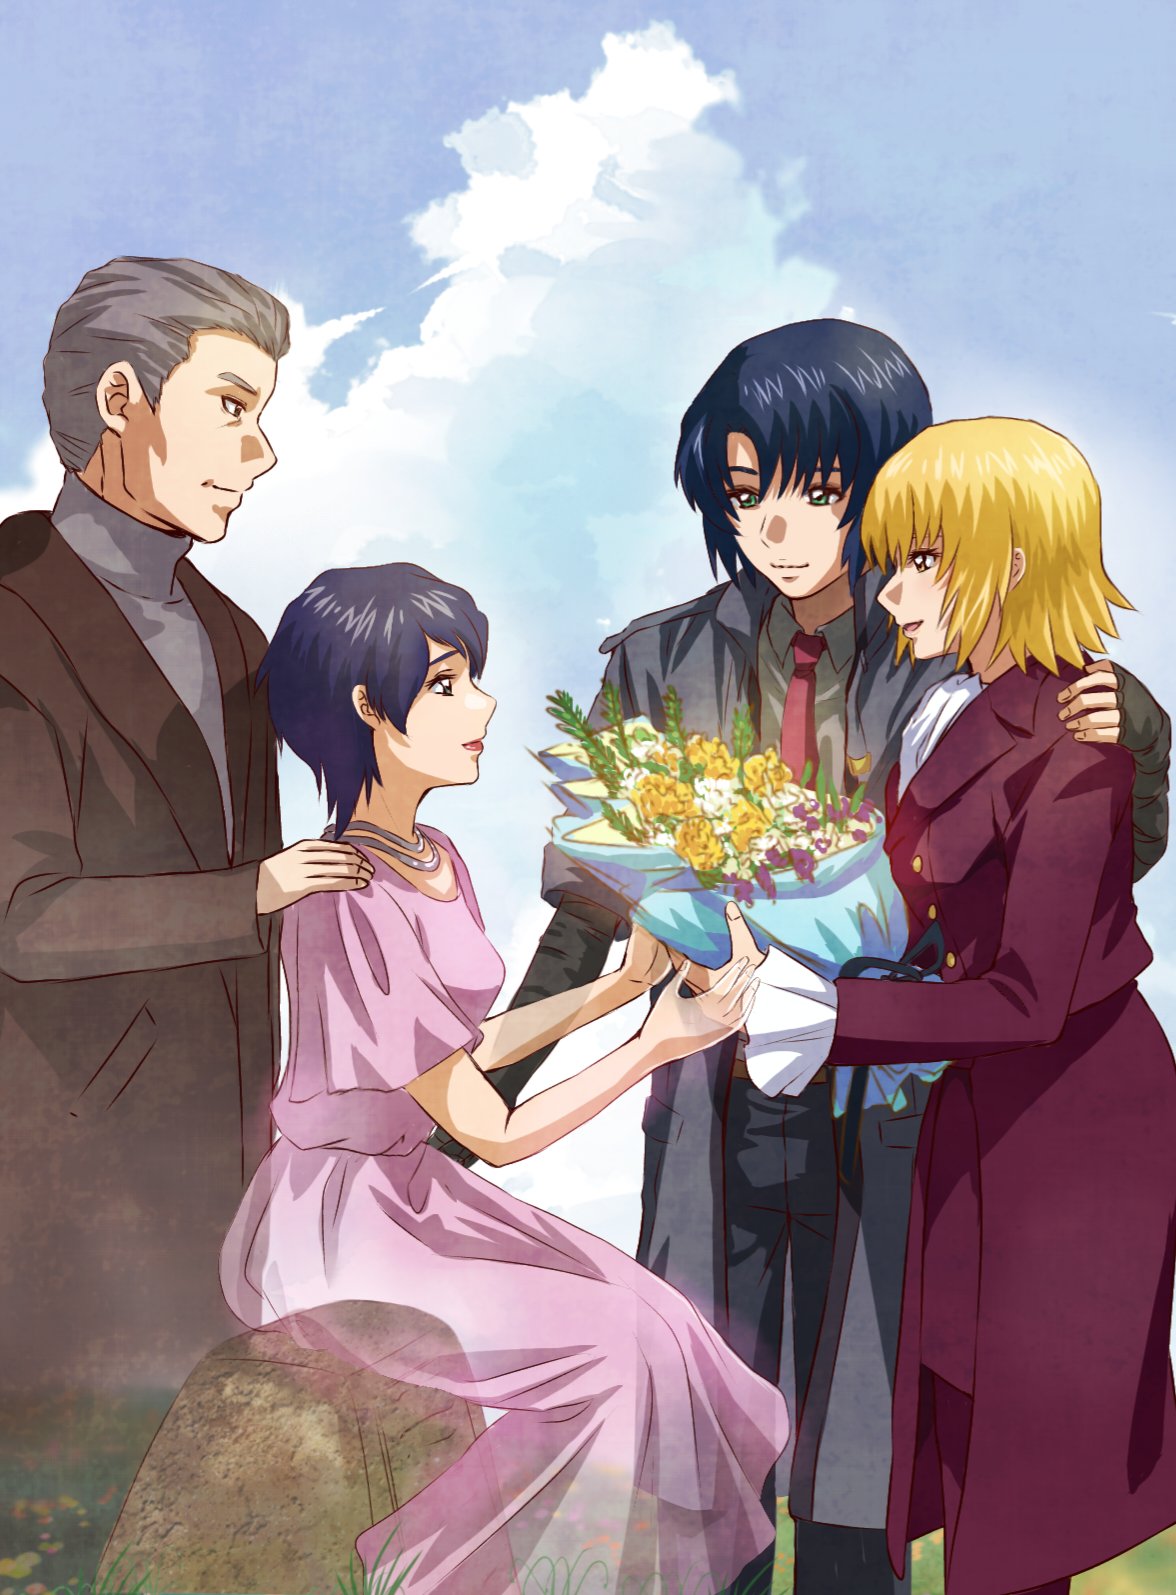 2boys 2girls athrun_zala blonde_hair blue_hair bouquet brown_coat cagalli_yula_athha coat dress father_and_son ghost green_eyes grey_hair grey_jacket gundam gundam_seed gundam_seed_freedom hand_on_another's_shoulder highres holding holding_bouquet husband_and_wife jacket jewelry lenore_zala light_smile mother_and_son multiple_boys multiple_girls necklace oliverb26658072 pant_suit pants patrick_zala pink_dress short_hair sky smile suit tombstone yellow_eyes